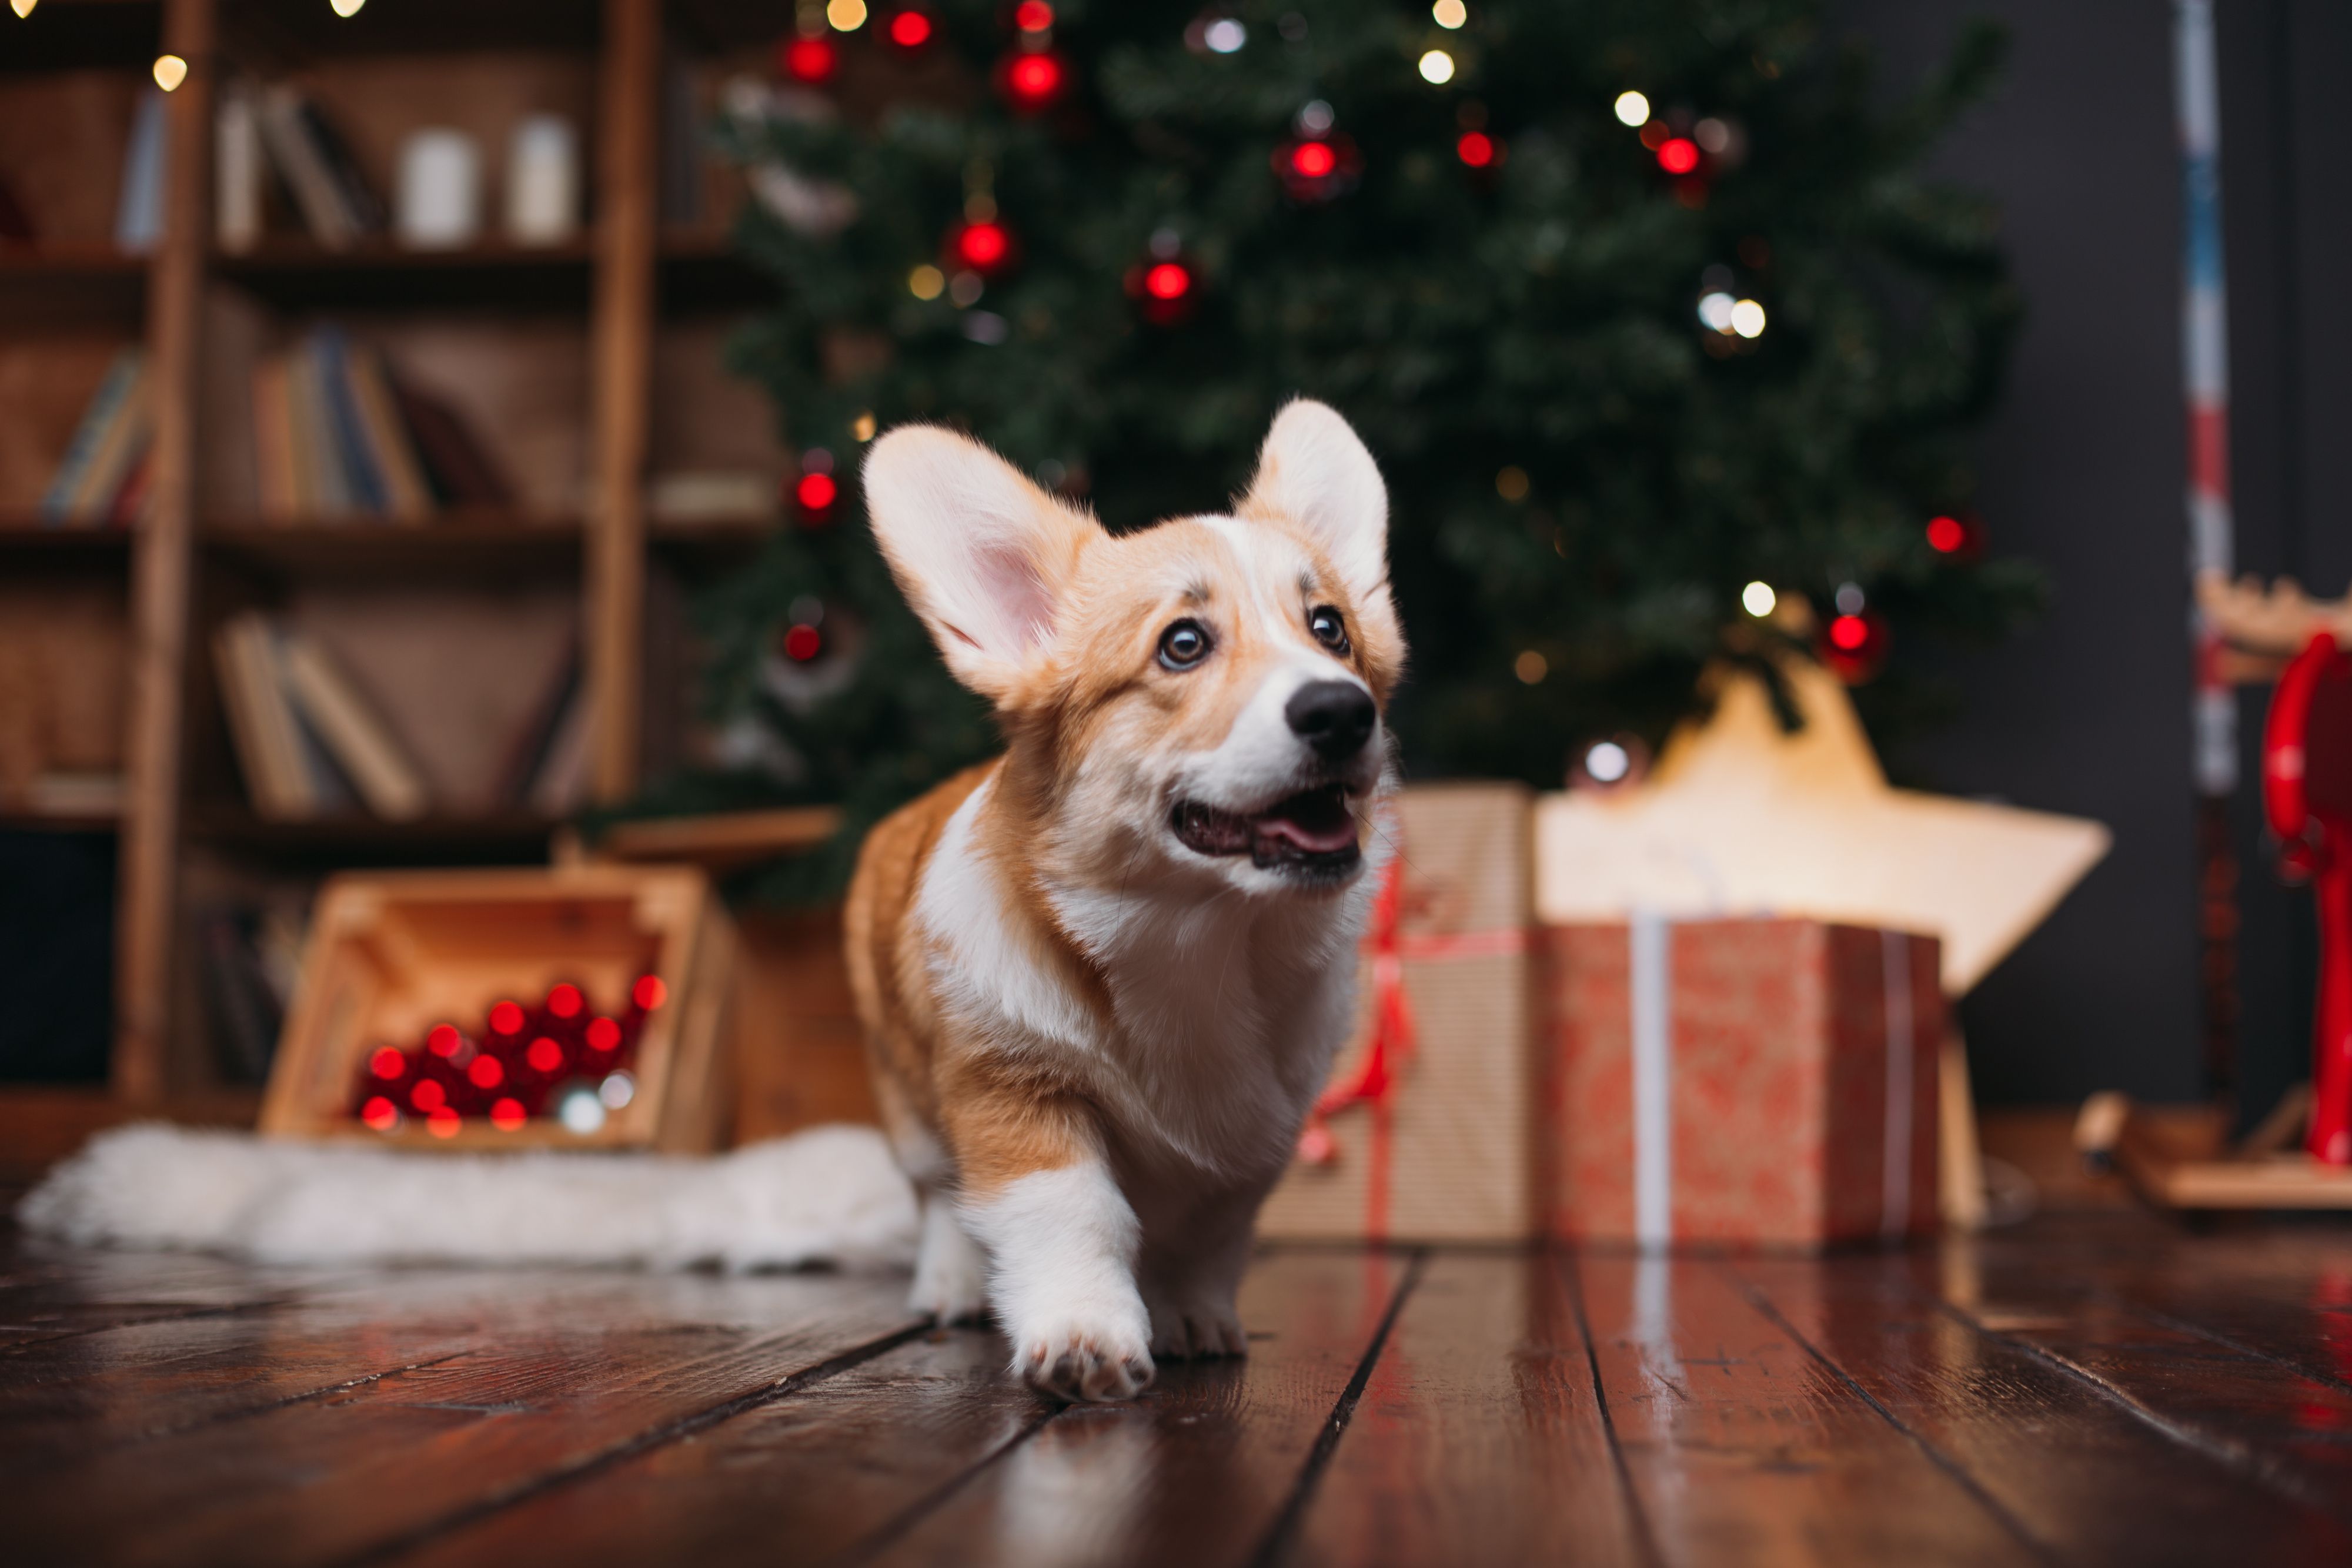 Pet Friendly Decorating: 13 Tips for a Safe Holiday - Diggs